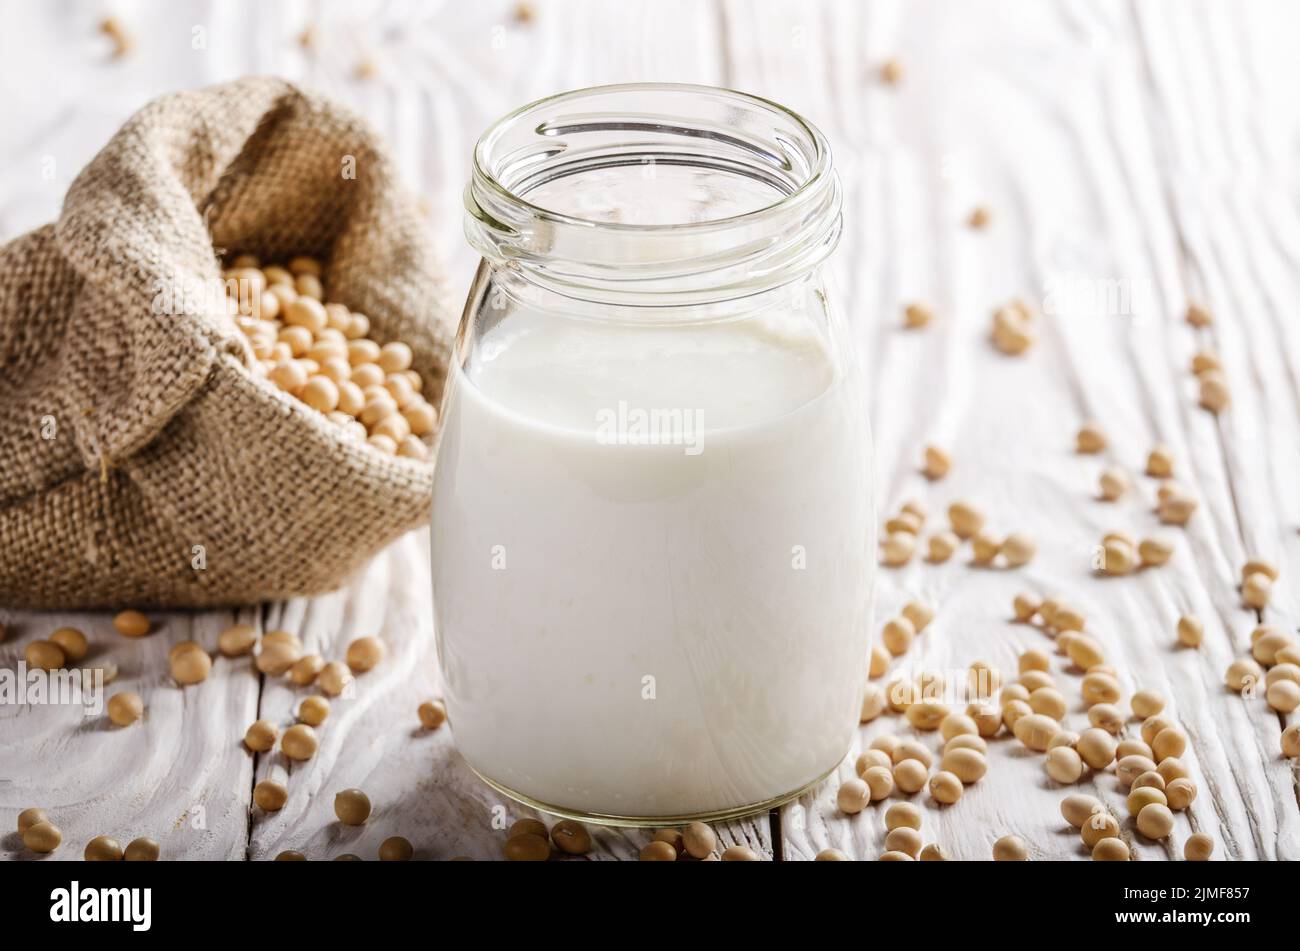 Non-dairy alternative Soy milk or yogurt in mason jar on white wooden table with soybeans in hemp sack Stock Photo